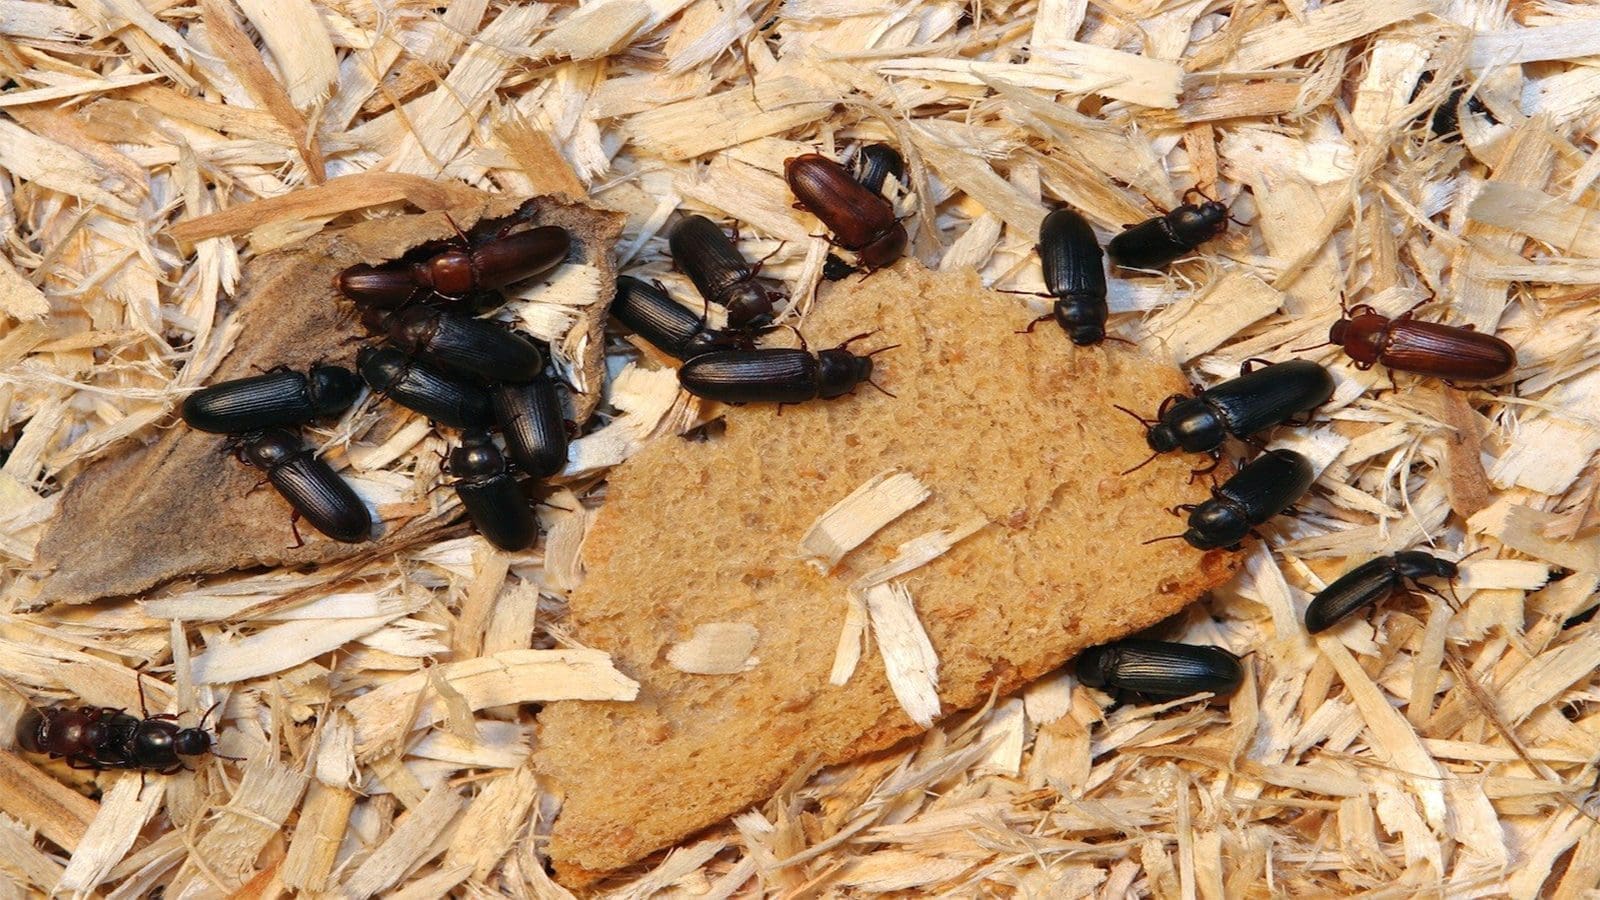 Control of Darkling beetle could prevent Salmonella in poultry